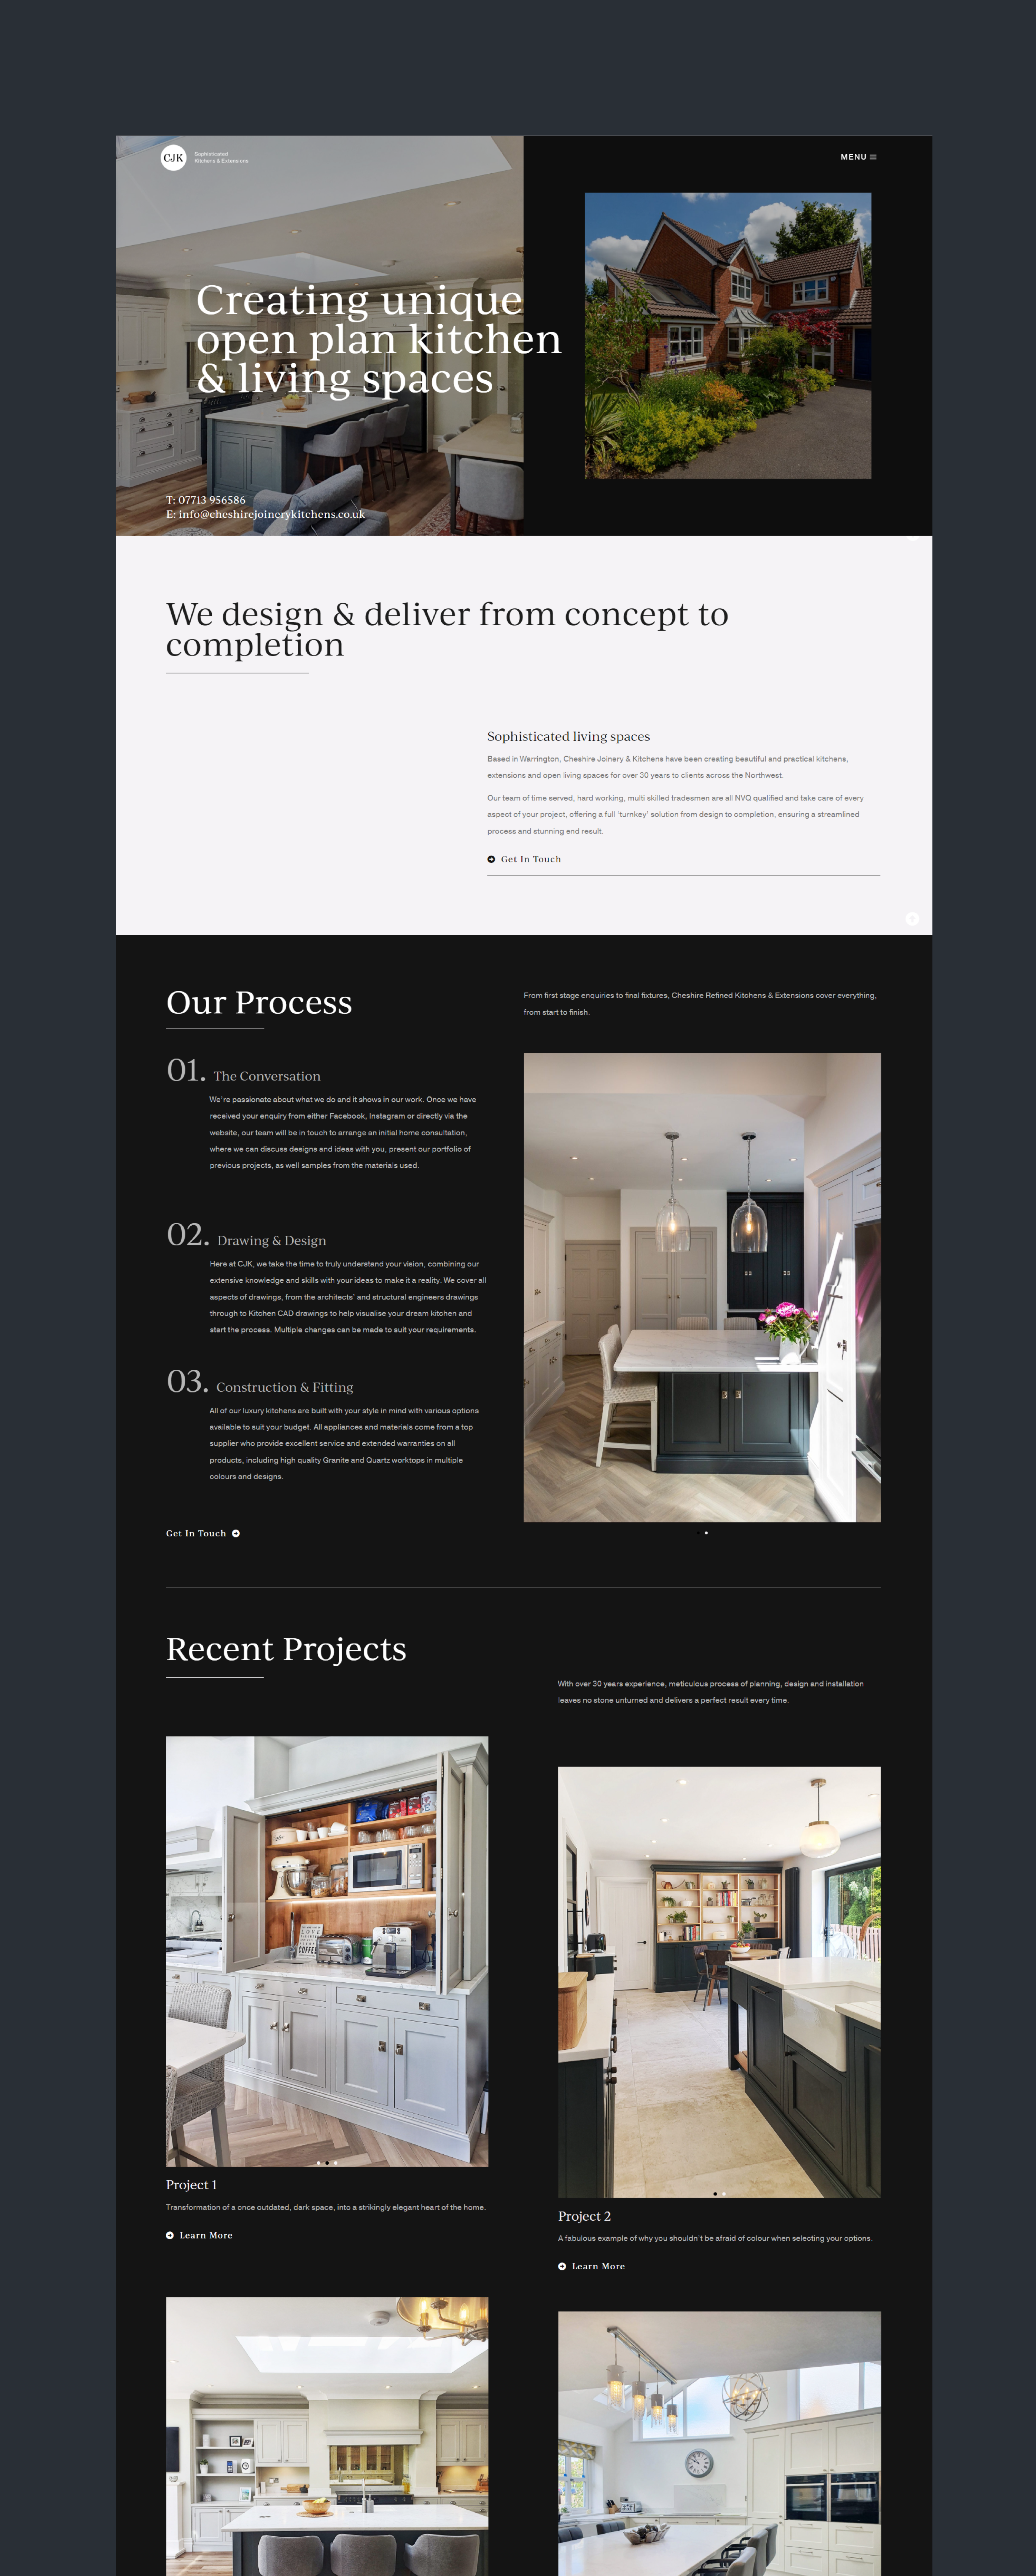 Full screen view of Cheshire Joinery & Kitchens website homepage design